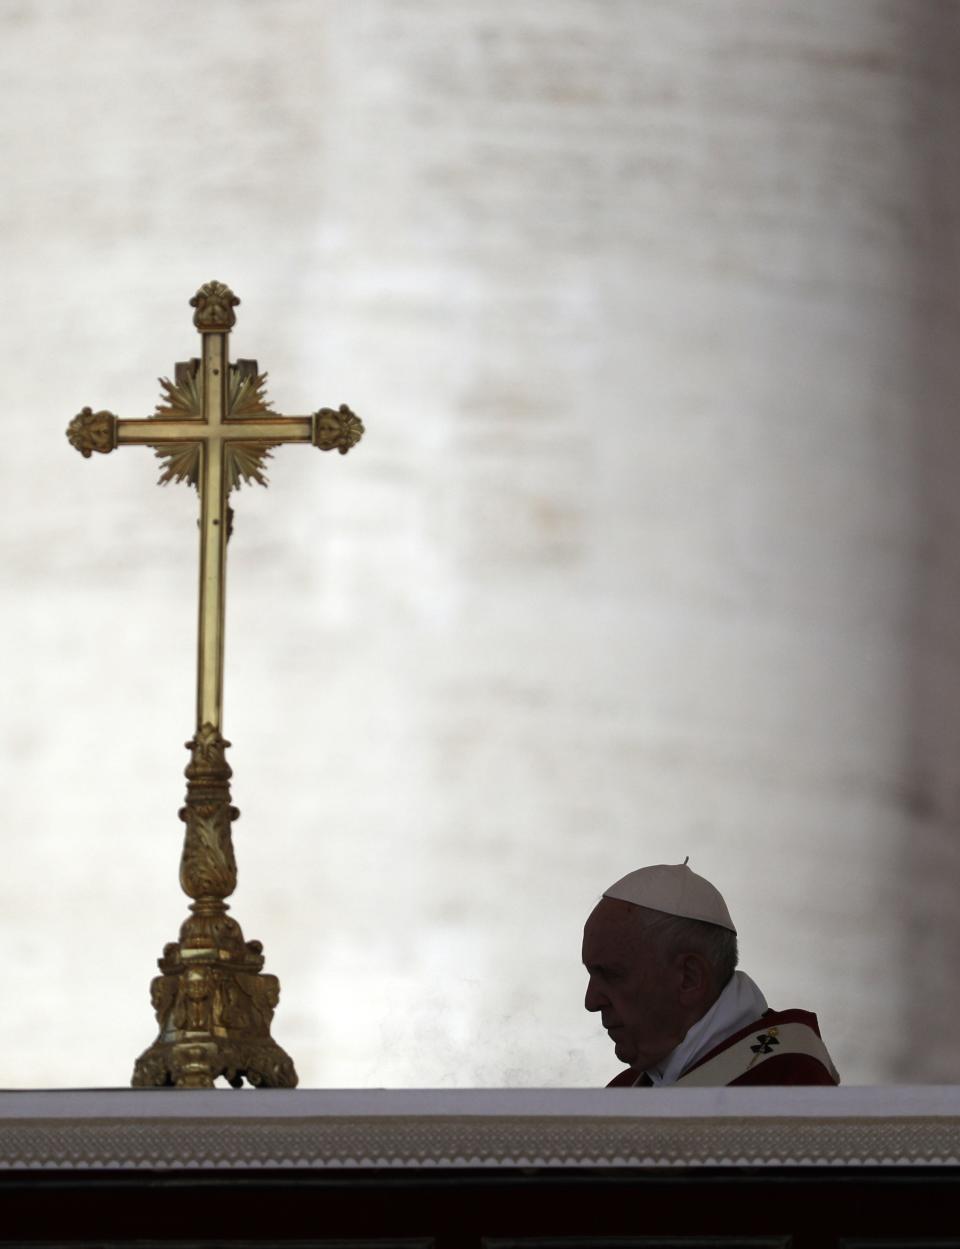 Pope Francis is silhouetted as he spreads incense on the altar during a Pentecost Mass in St. Peter's Square, at the Vatican, Sunday, June 9, 2019. The Pentecost Mass is celebrated on the seventh Sunday after Easter. (AP Photo/Gregorio Borgia)